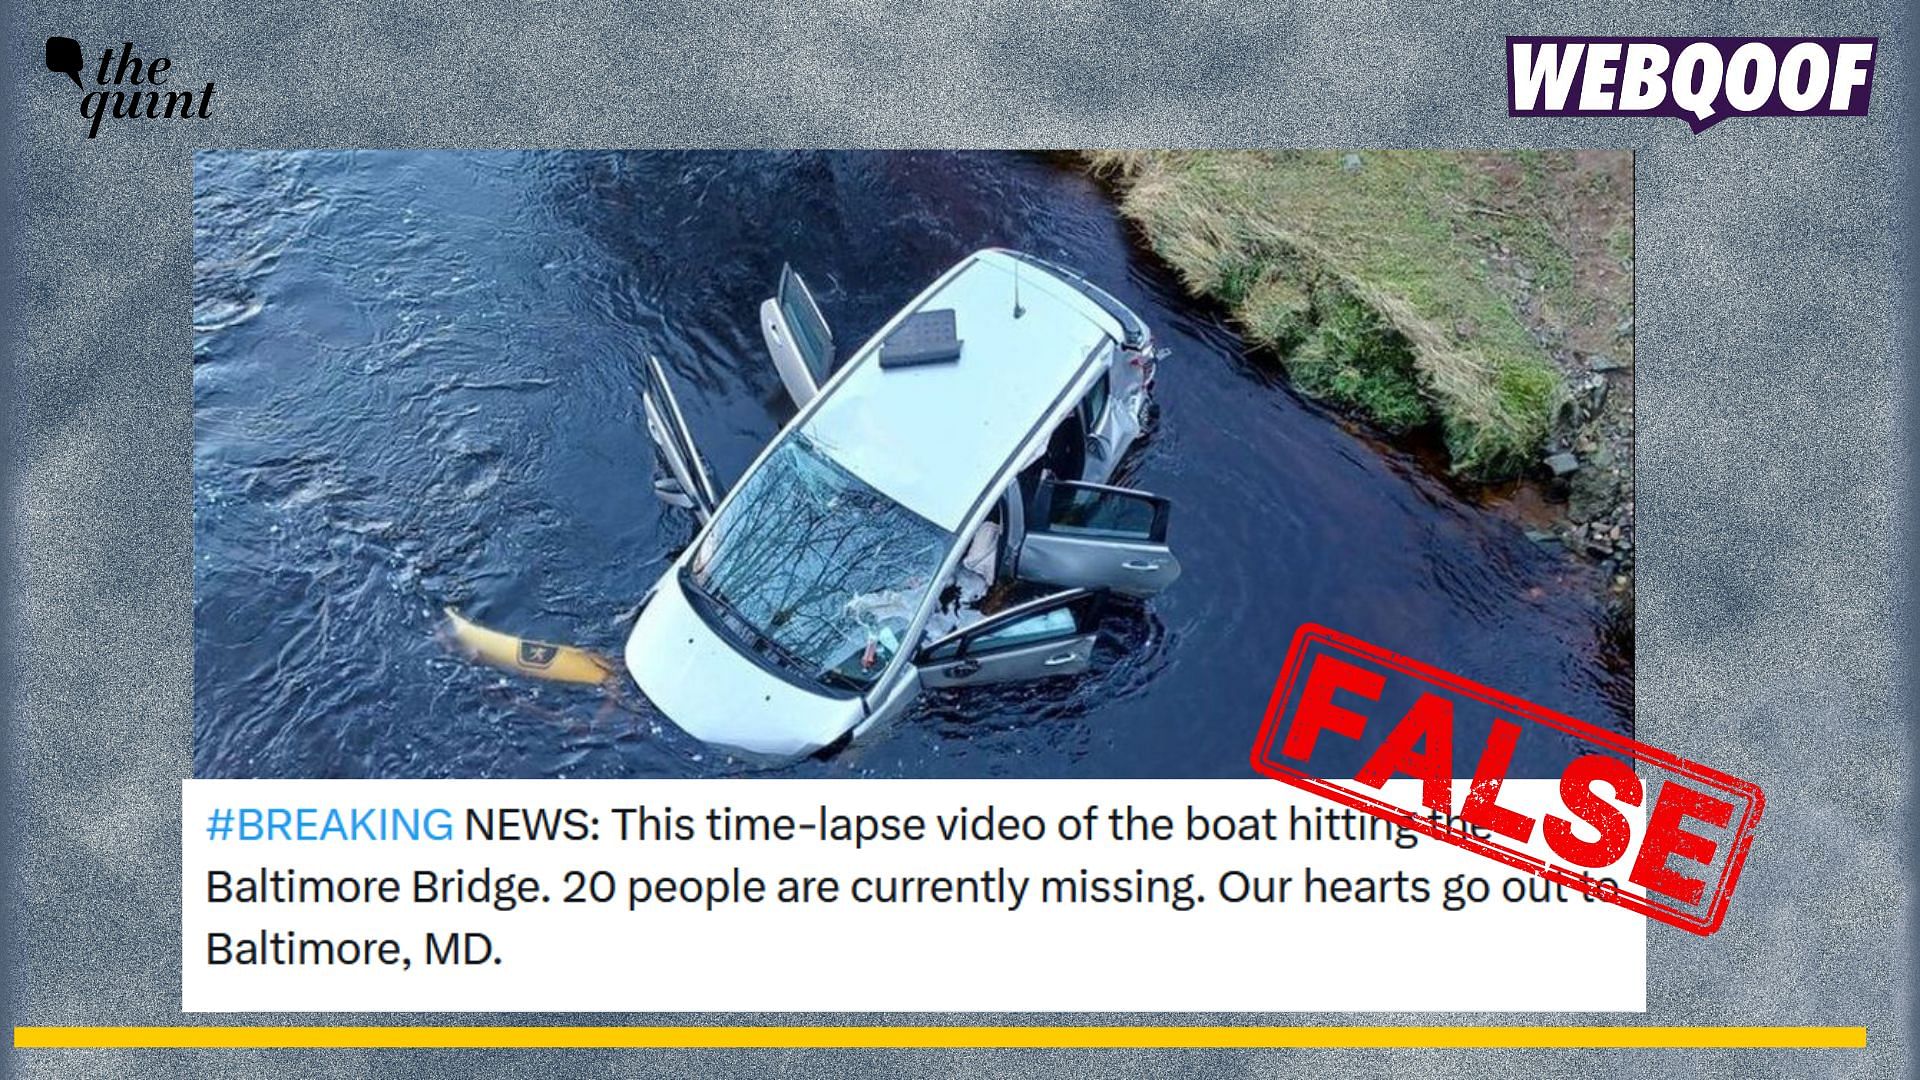 Old Image of Car Drowning in a Lake Falsely Linked to Baltimore Bridge Collapse